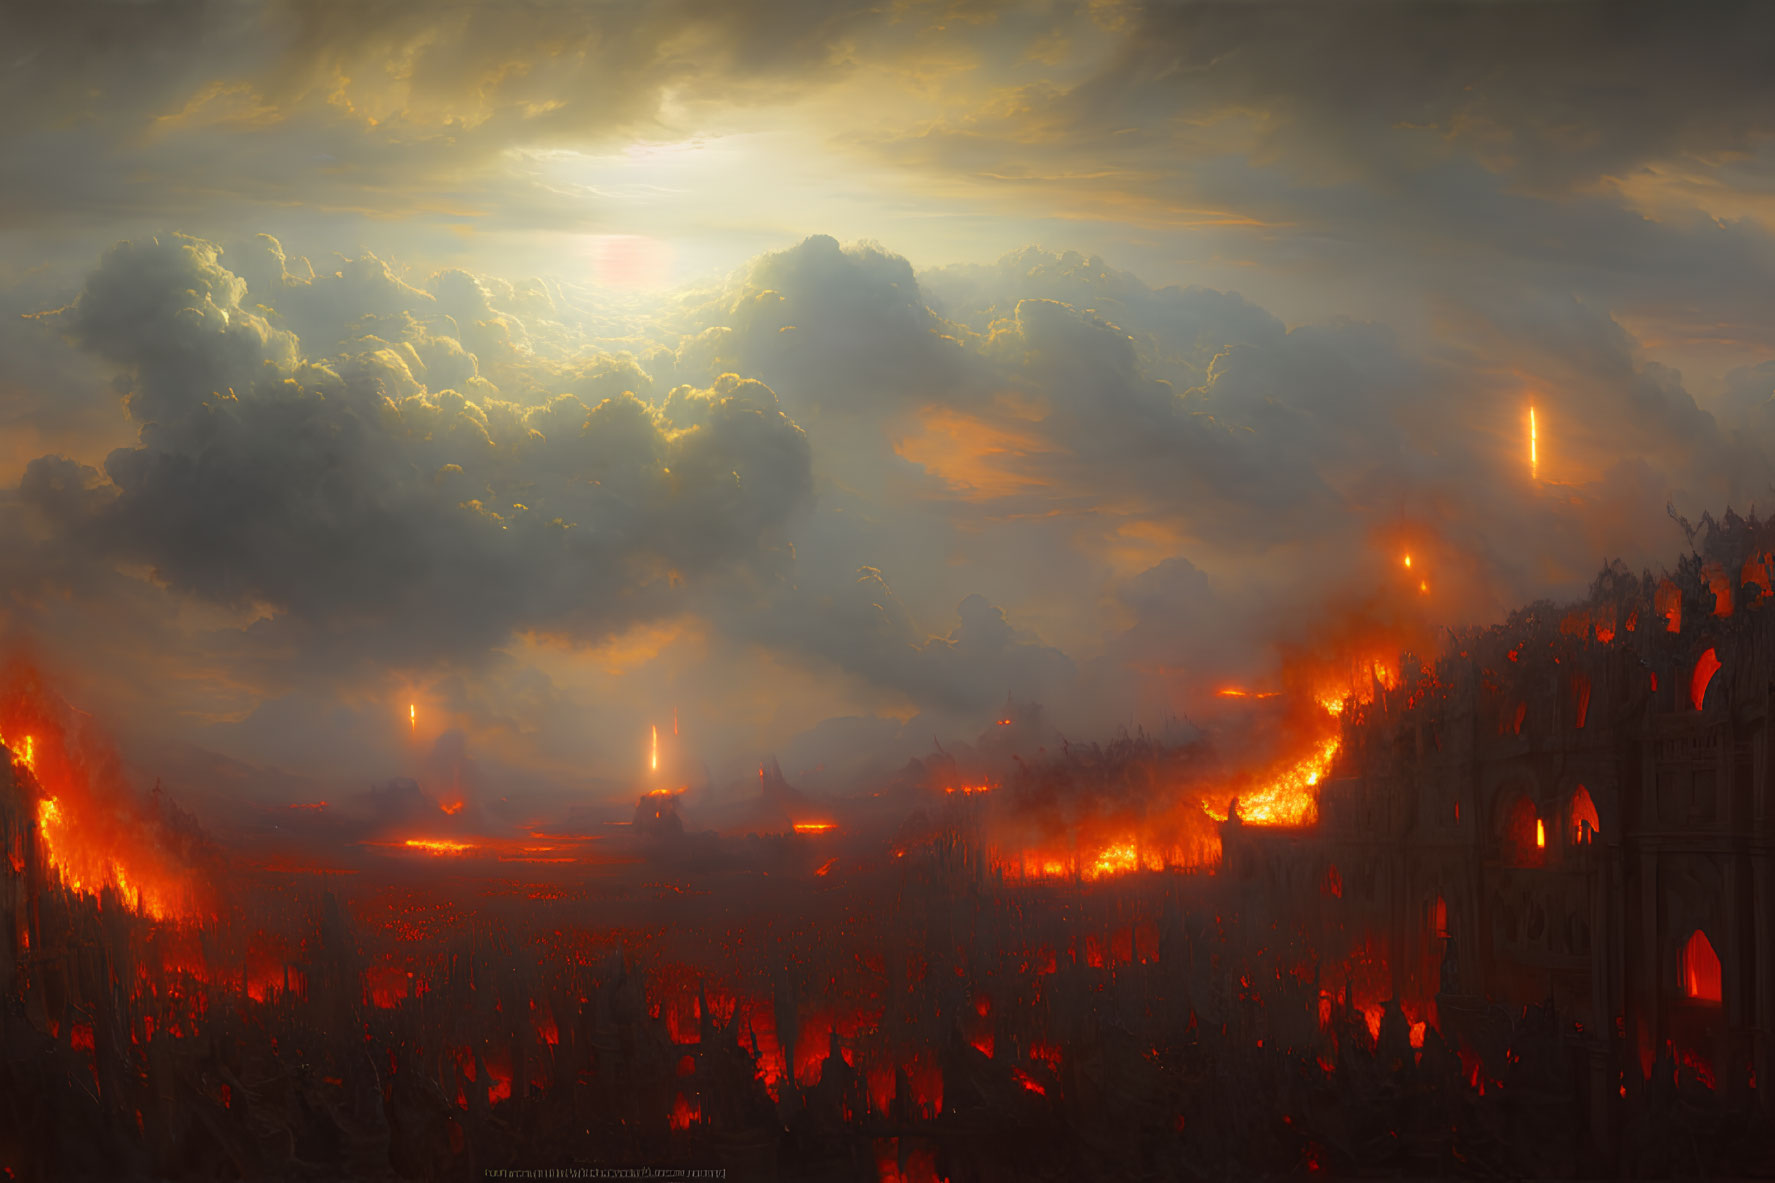 Glowing red sky over fiery landscape and engulfed structures